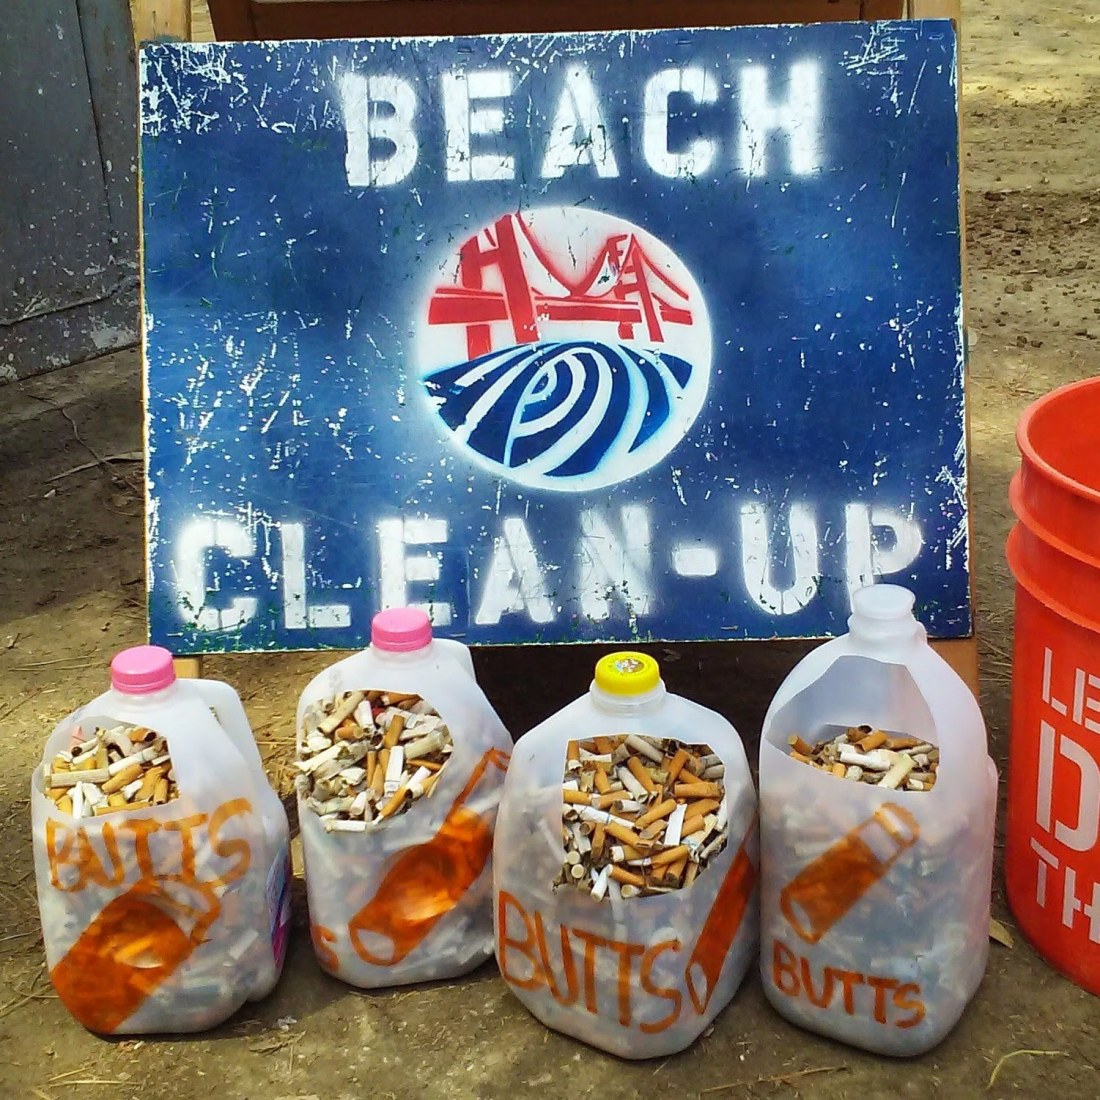 Milk jugs holding collected cigarette butts next to a beach cleanup sign.